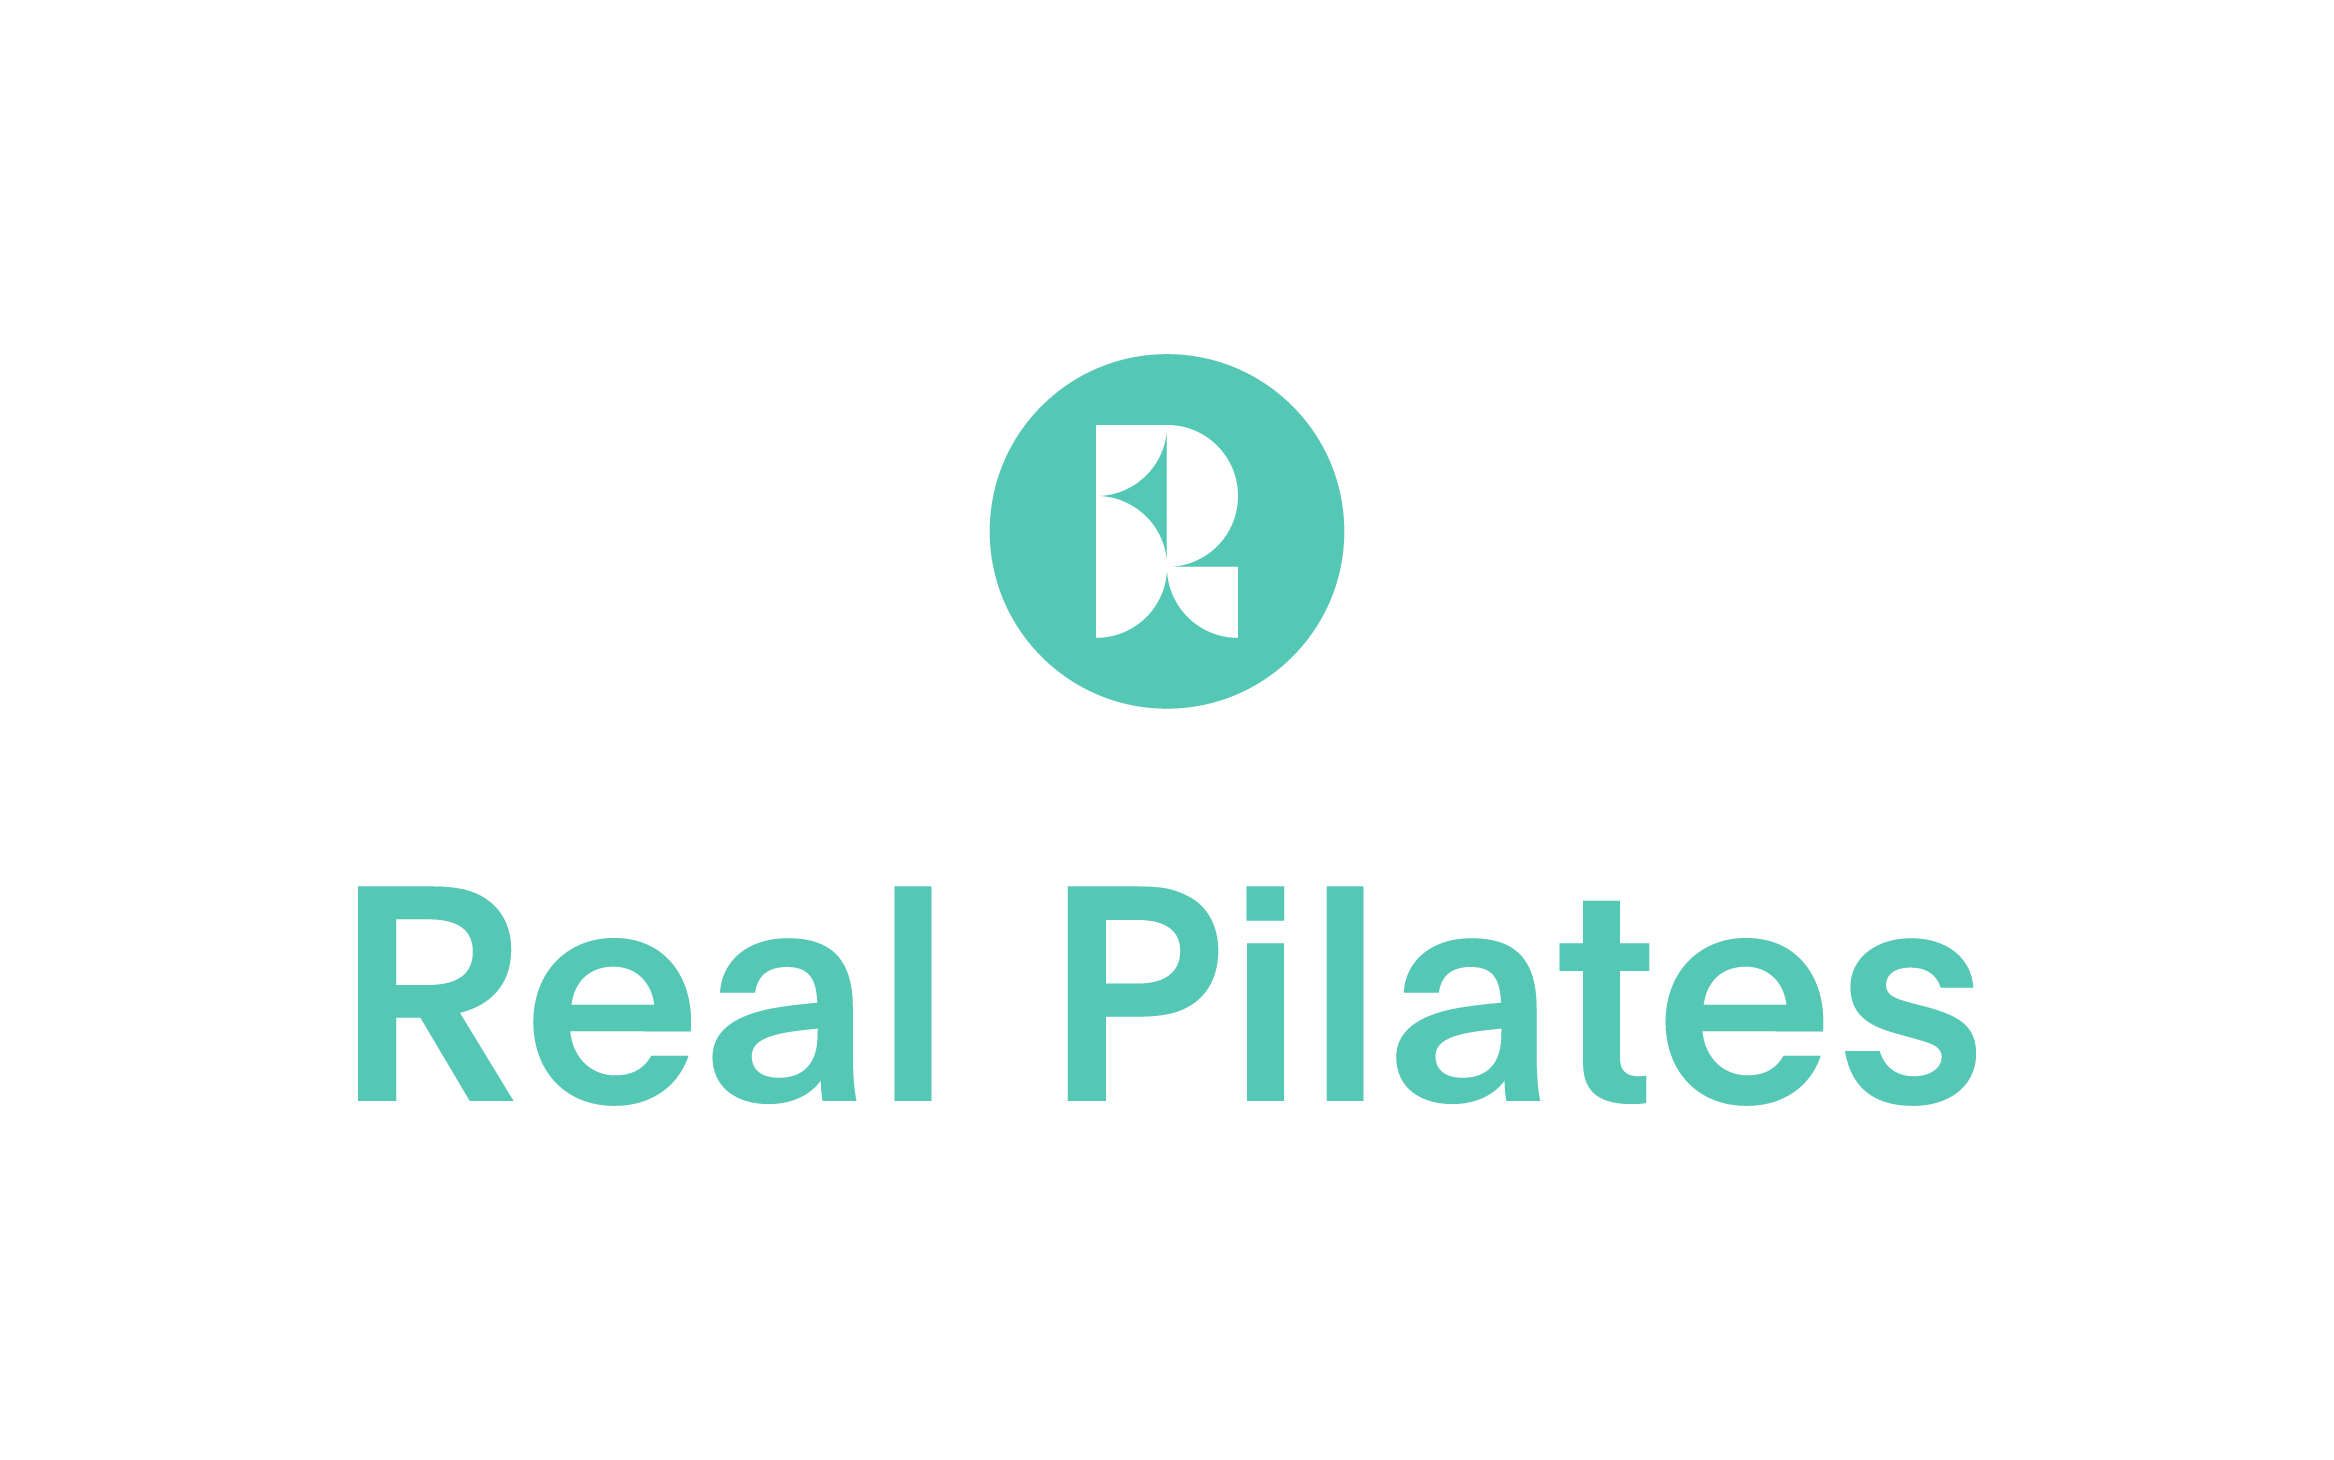 RealPilates on Oct 21st at 5:30pm ET